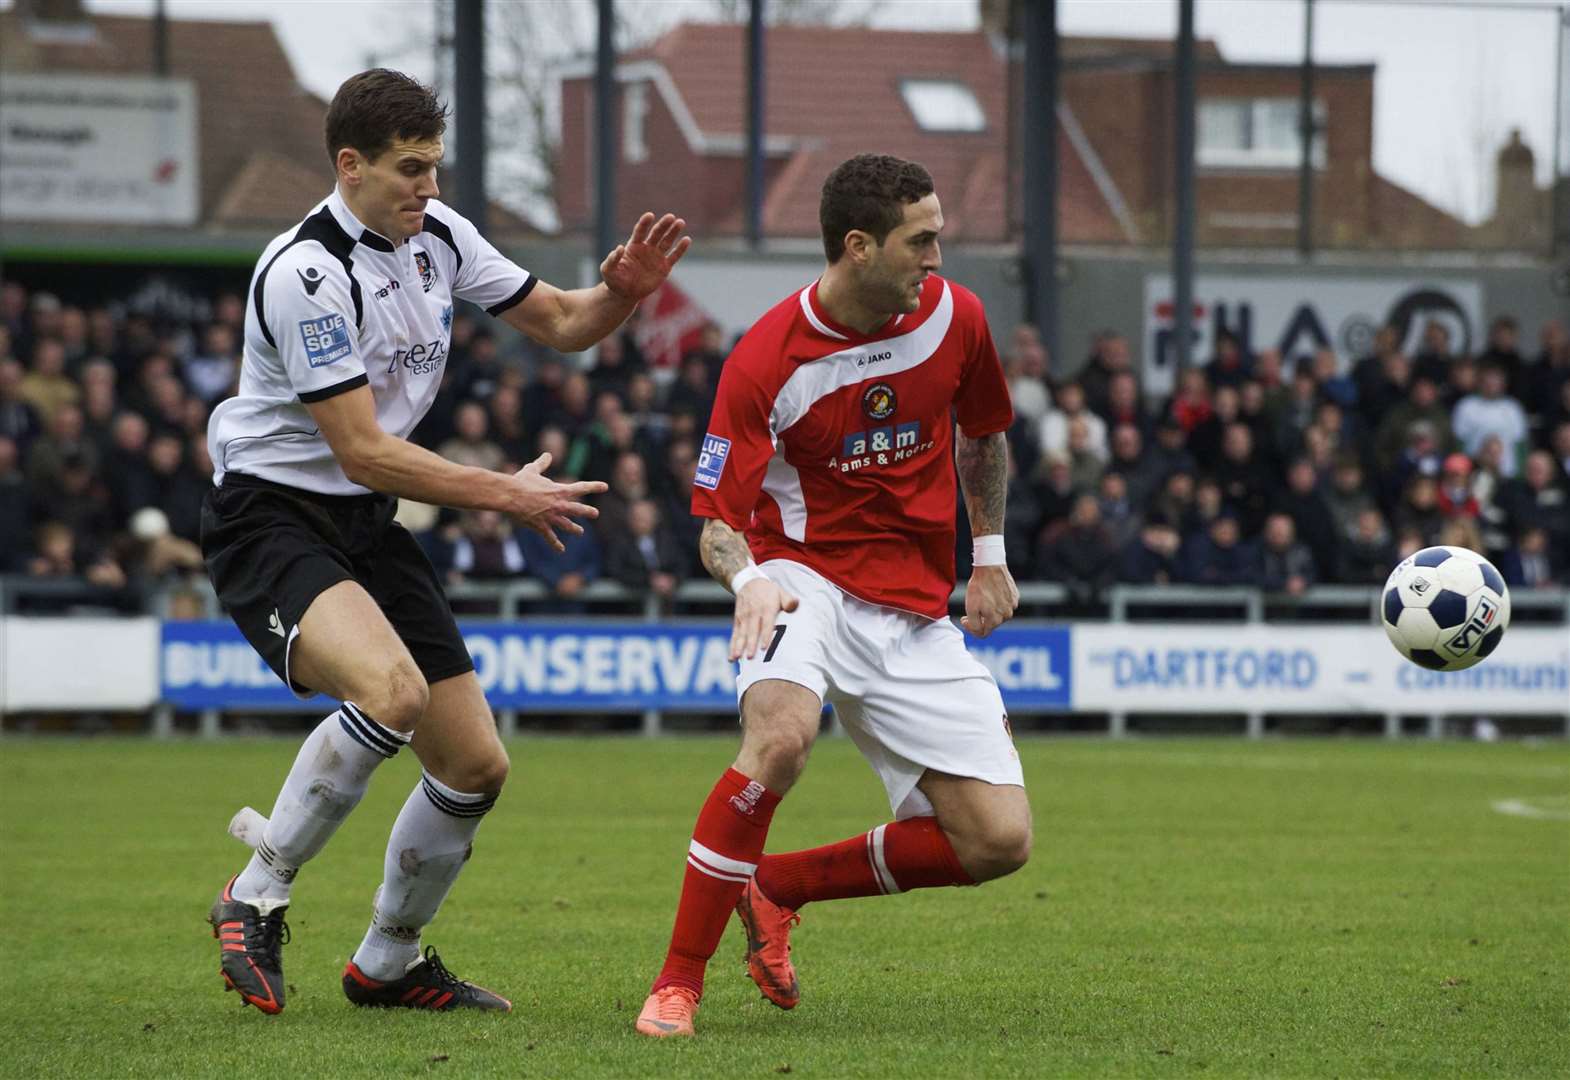 Princes Park derby action from 2012 as Tom Bonner is up against Liam Enver-Marum of Ebbsfleet. Picture: Andy Payton